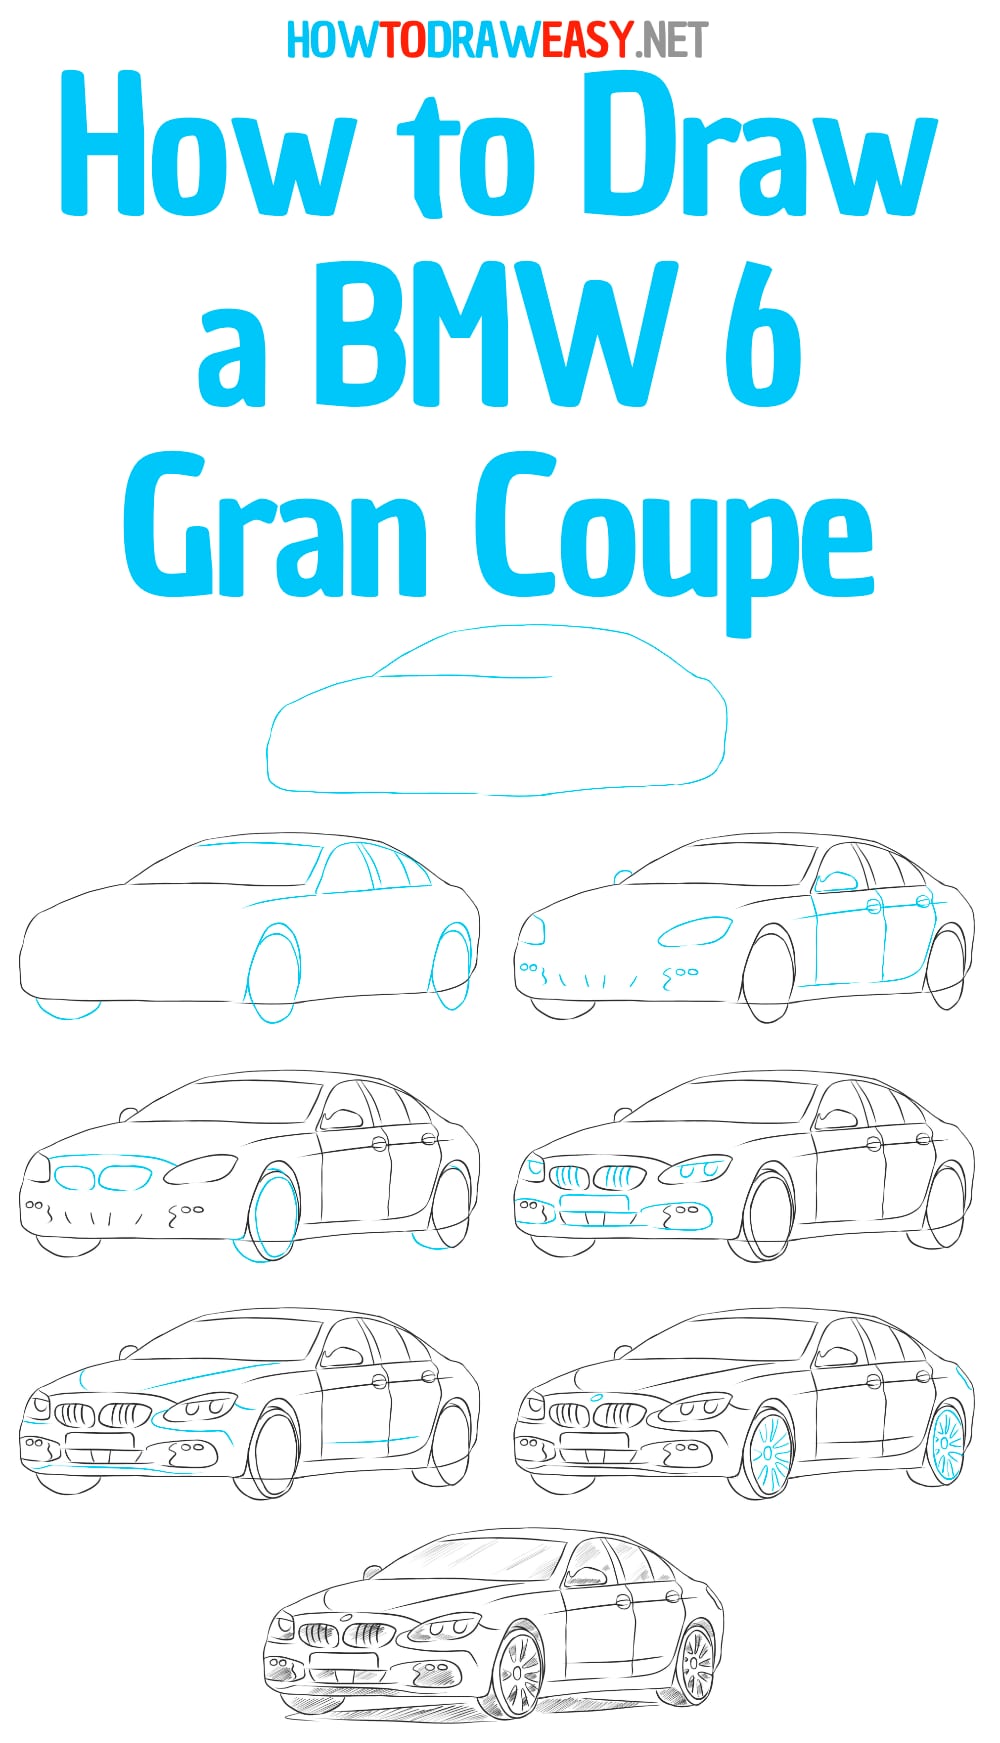 how to draw a bmw 6 gran coupe step by step